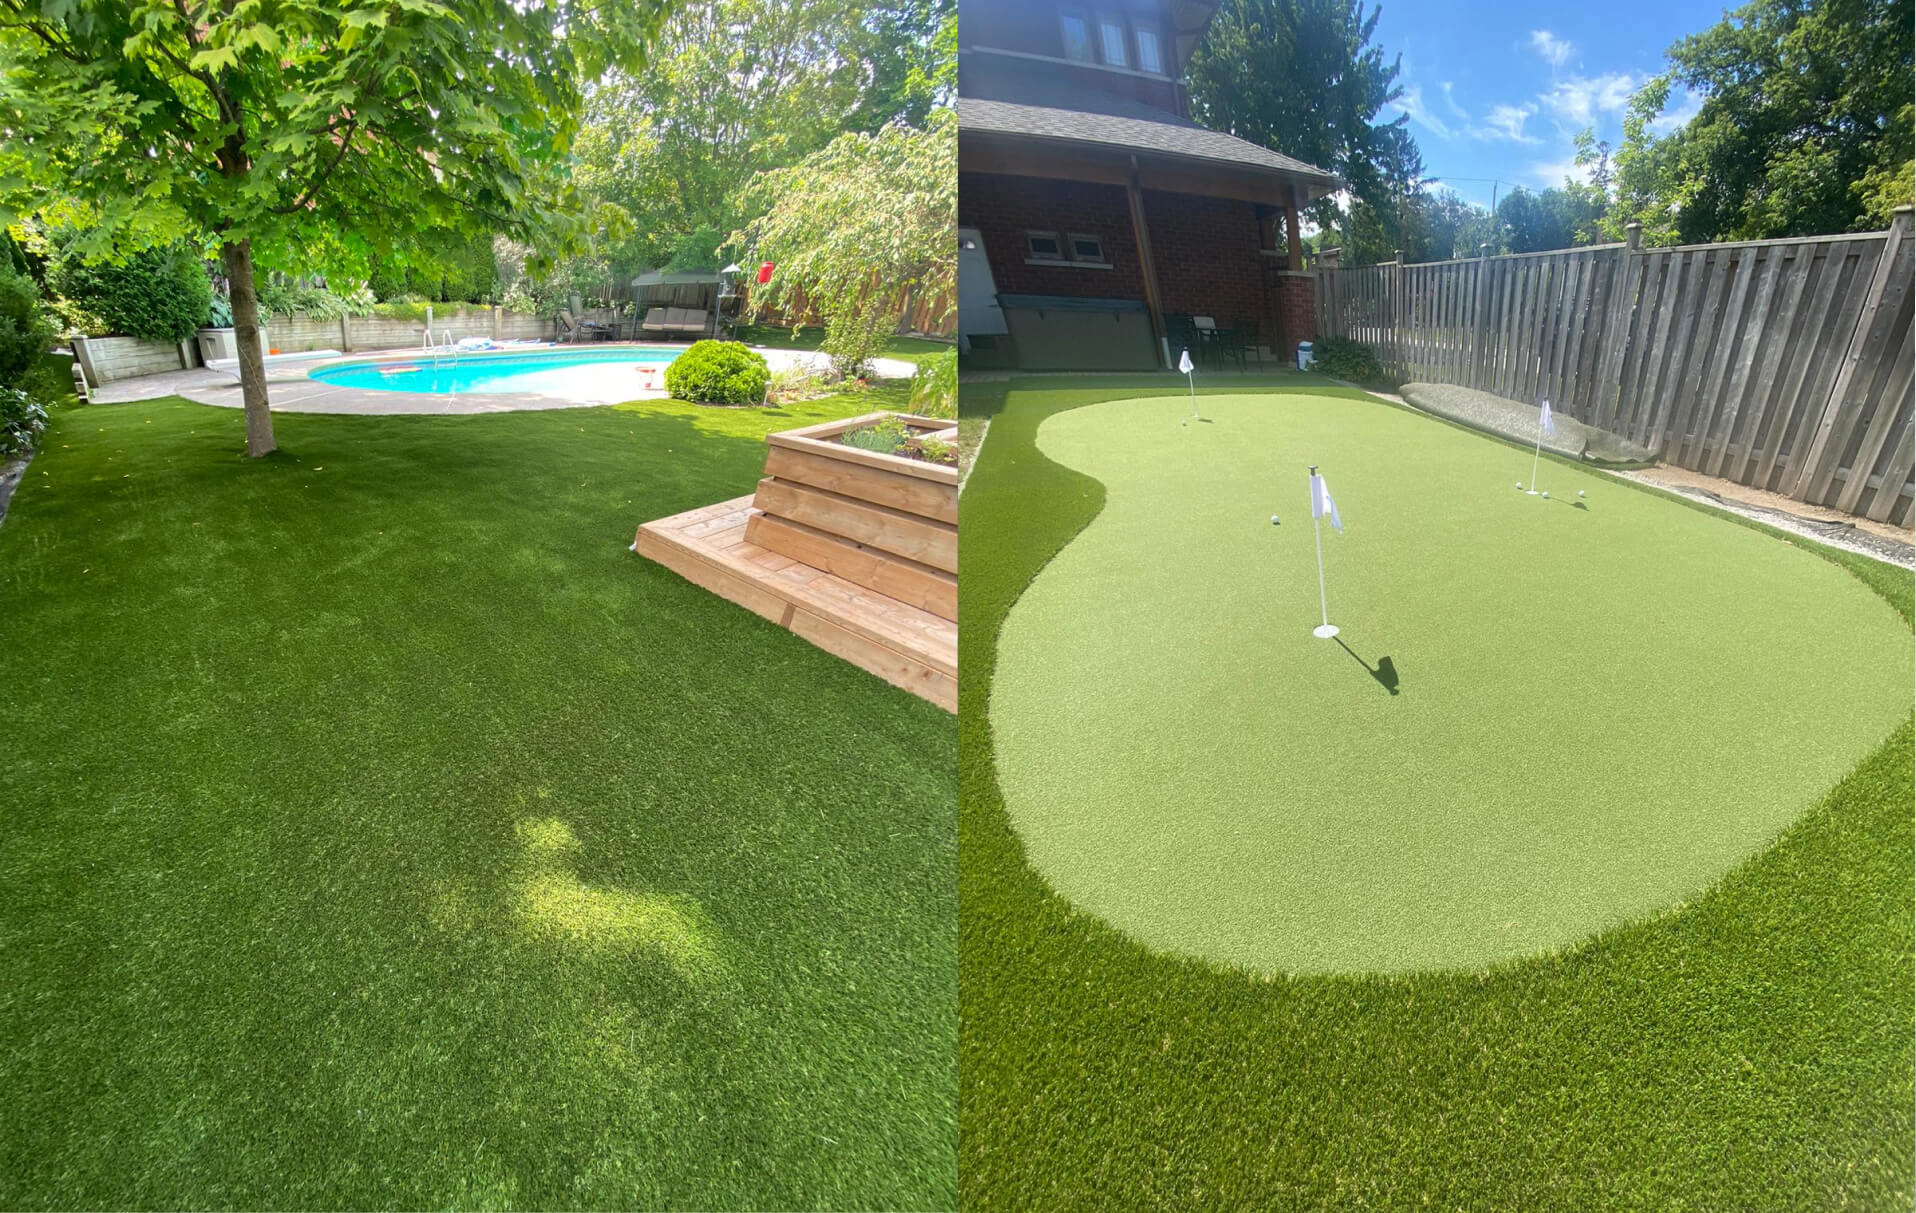 Upgrade Your Property With <span style="color: #0AE294;font-weight: bold">Artificial Turf </span>